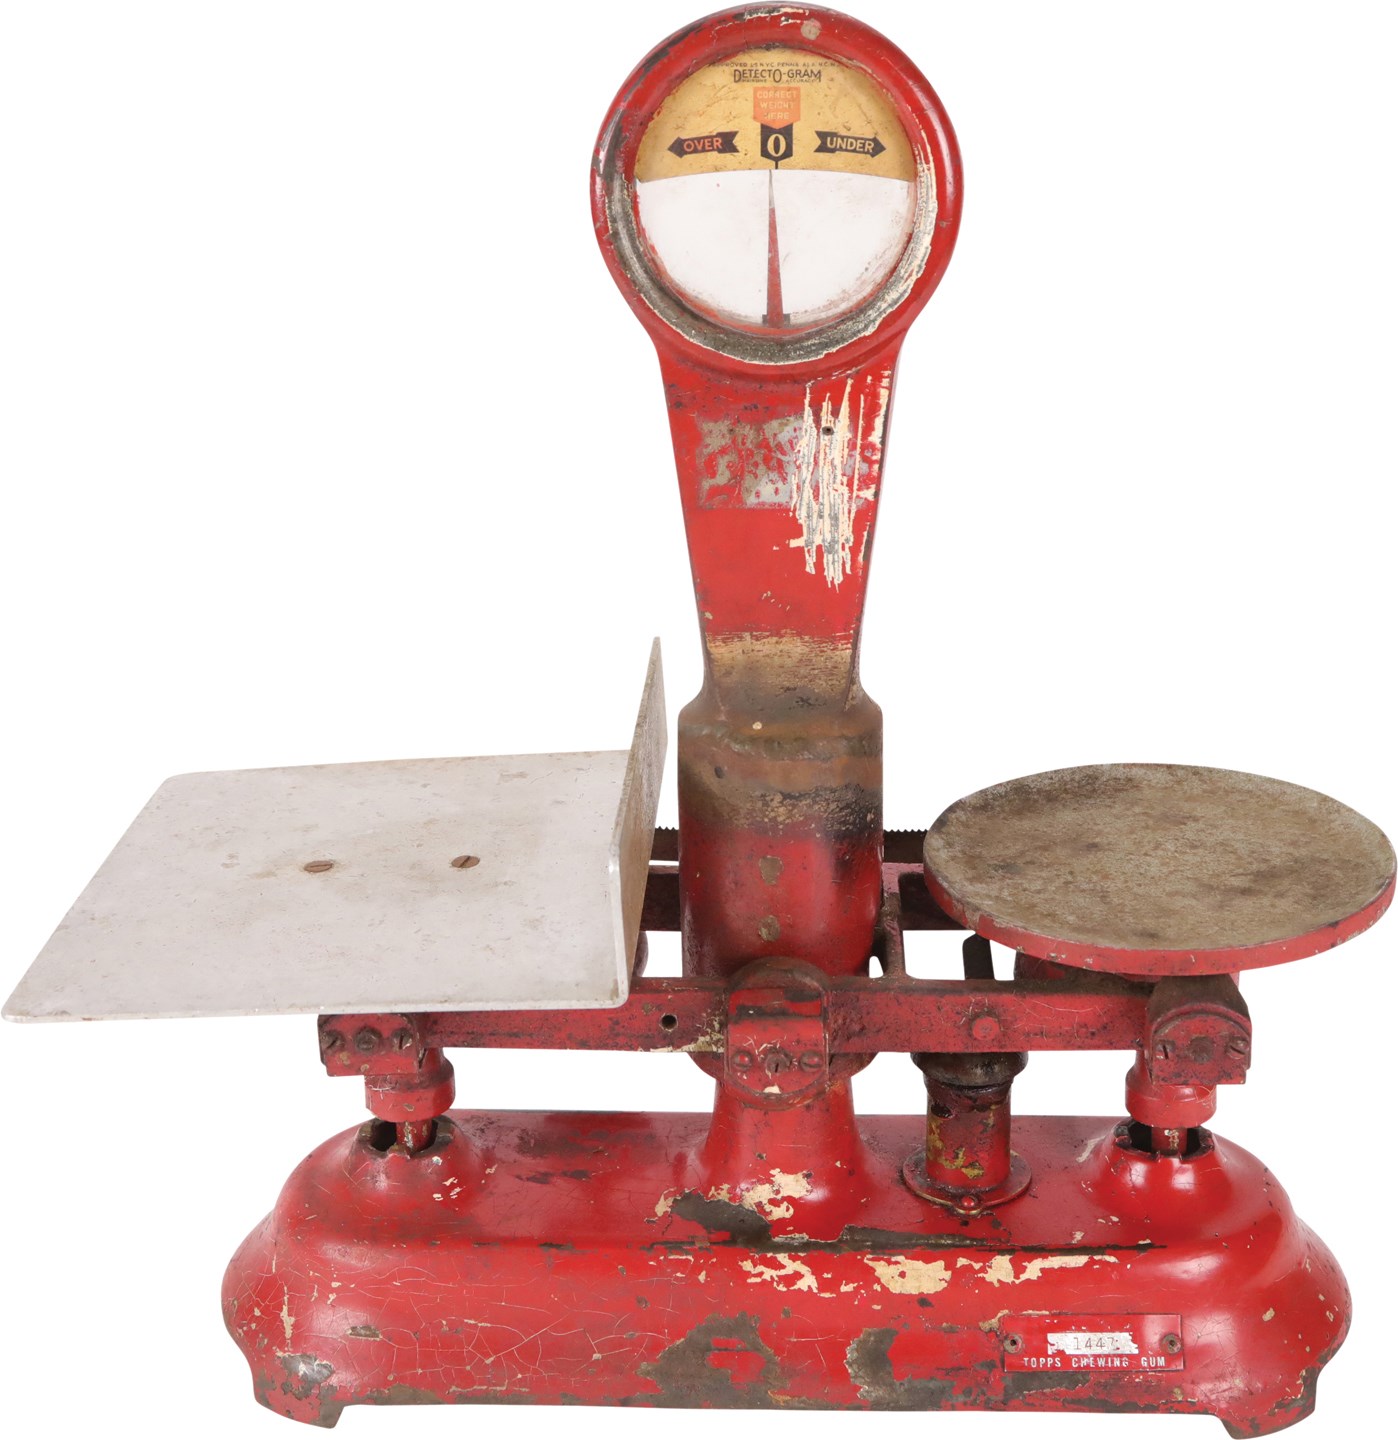 - Early 1950 Topps Scale Used to Weigh Boxes of Cards